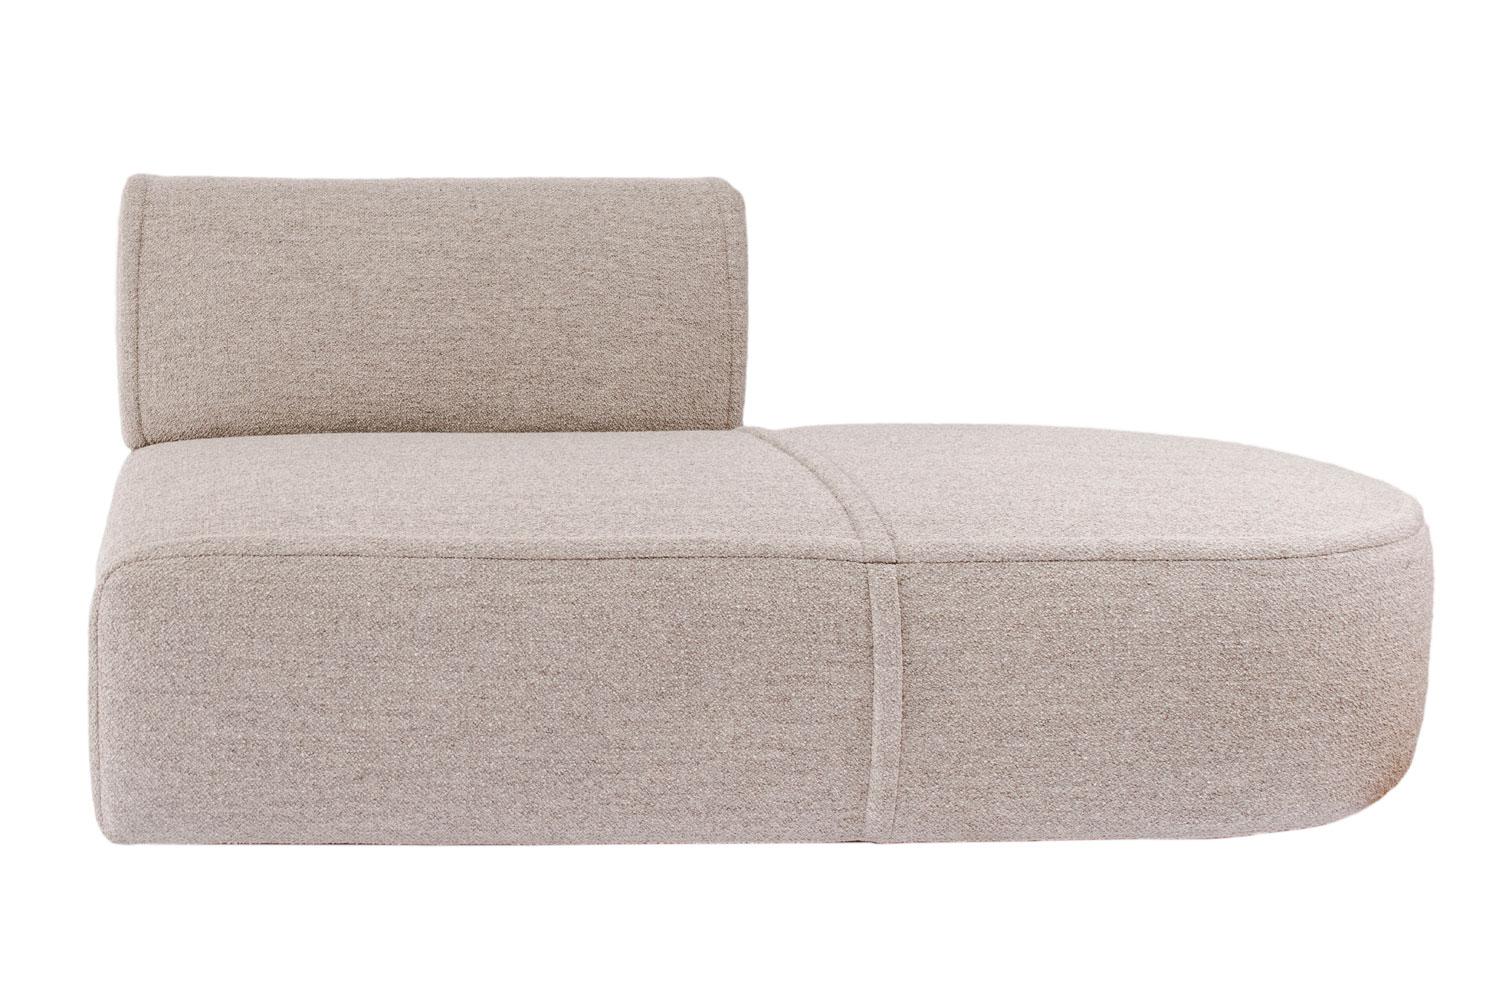 Bowy sectional sofa by Cassina

The soft, welcoming lines of this sofa spell comfort and flexibility. Circular, semi-circular and rectangular shapes alternate to create a dynamic interplay of contours and a graphic silhouette. The rounded armrest